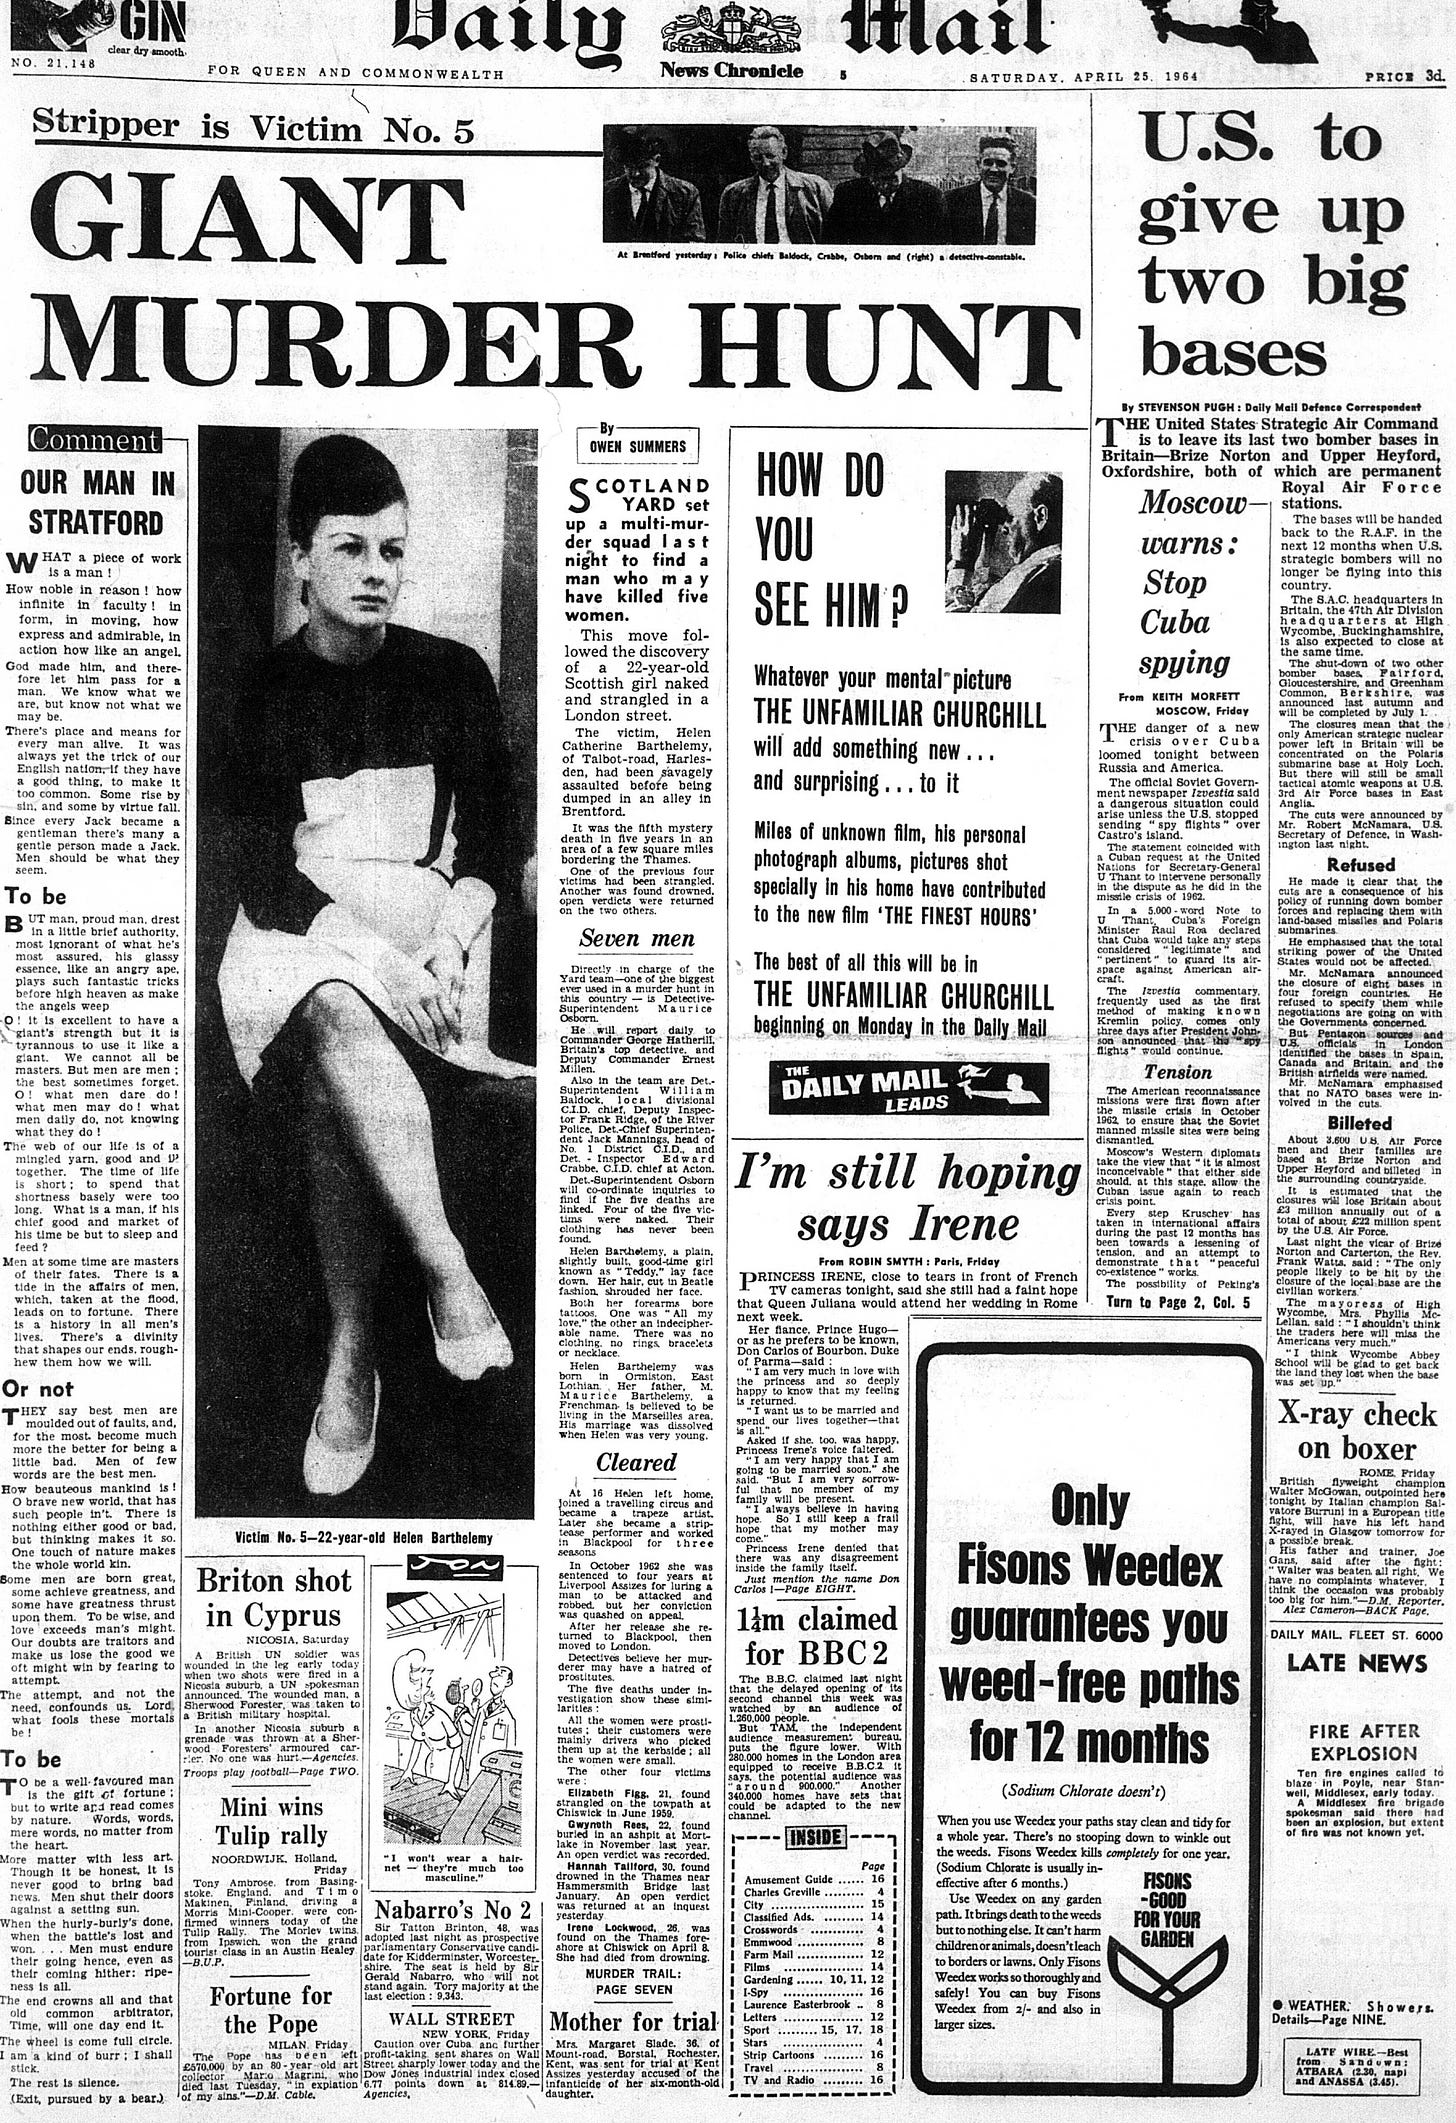 Daily Mail headllne on the Hammersmith Nude Murders case 